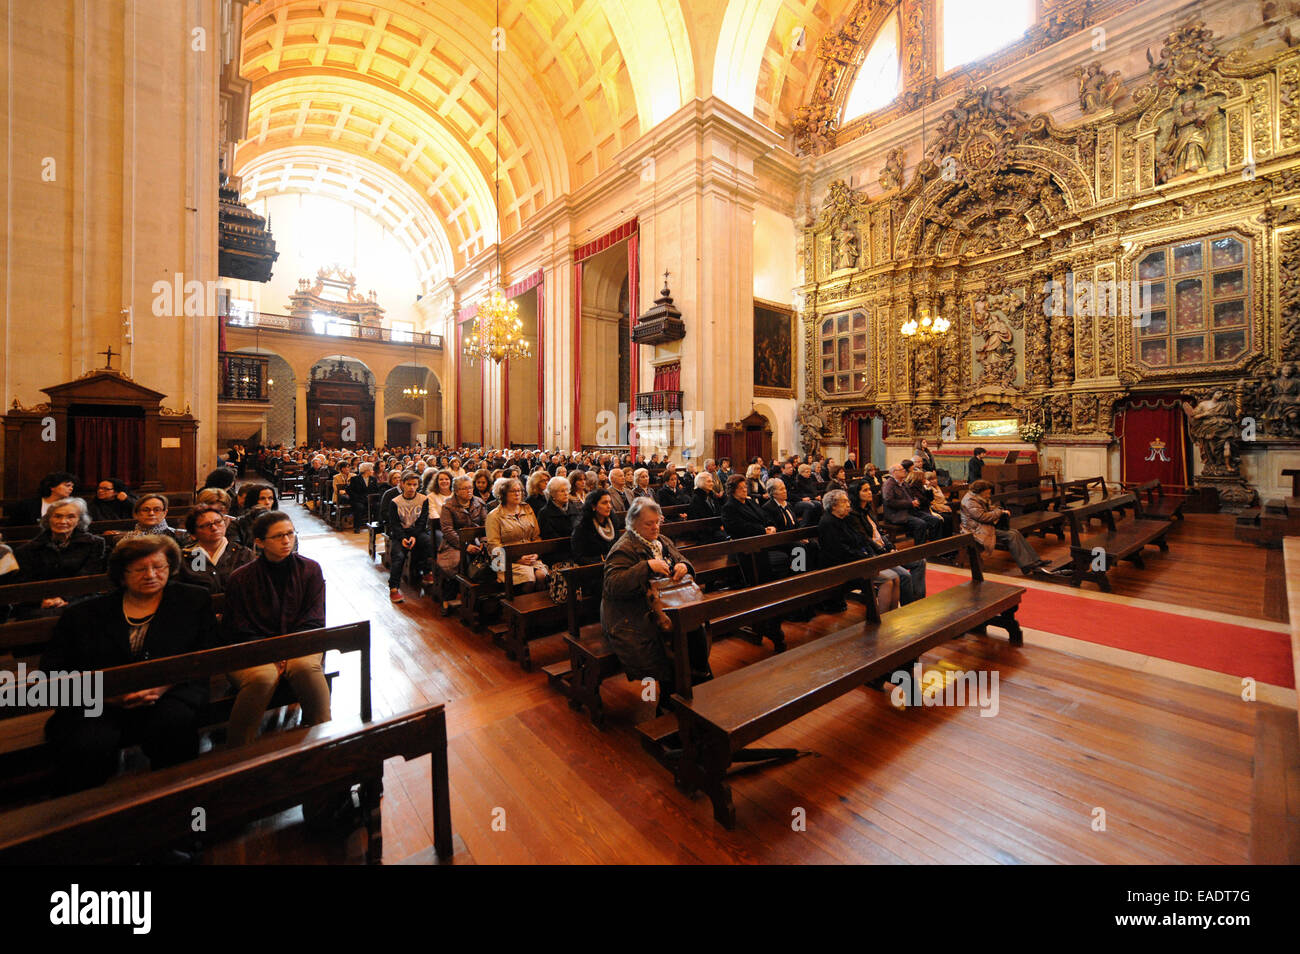 Catholic mass at the Sé Nova cathedral in Coimbra, Portugal, Europe Stock Photo